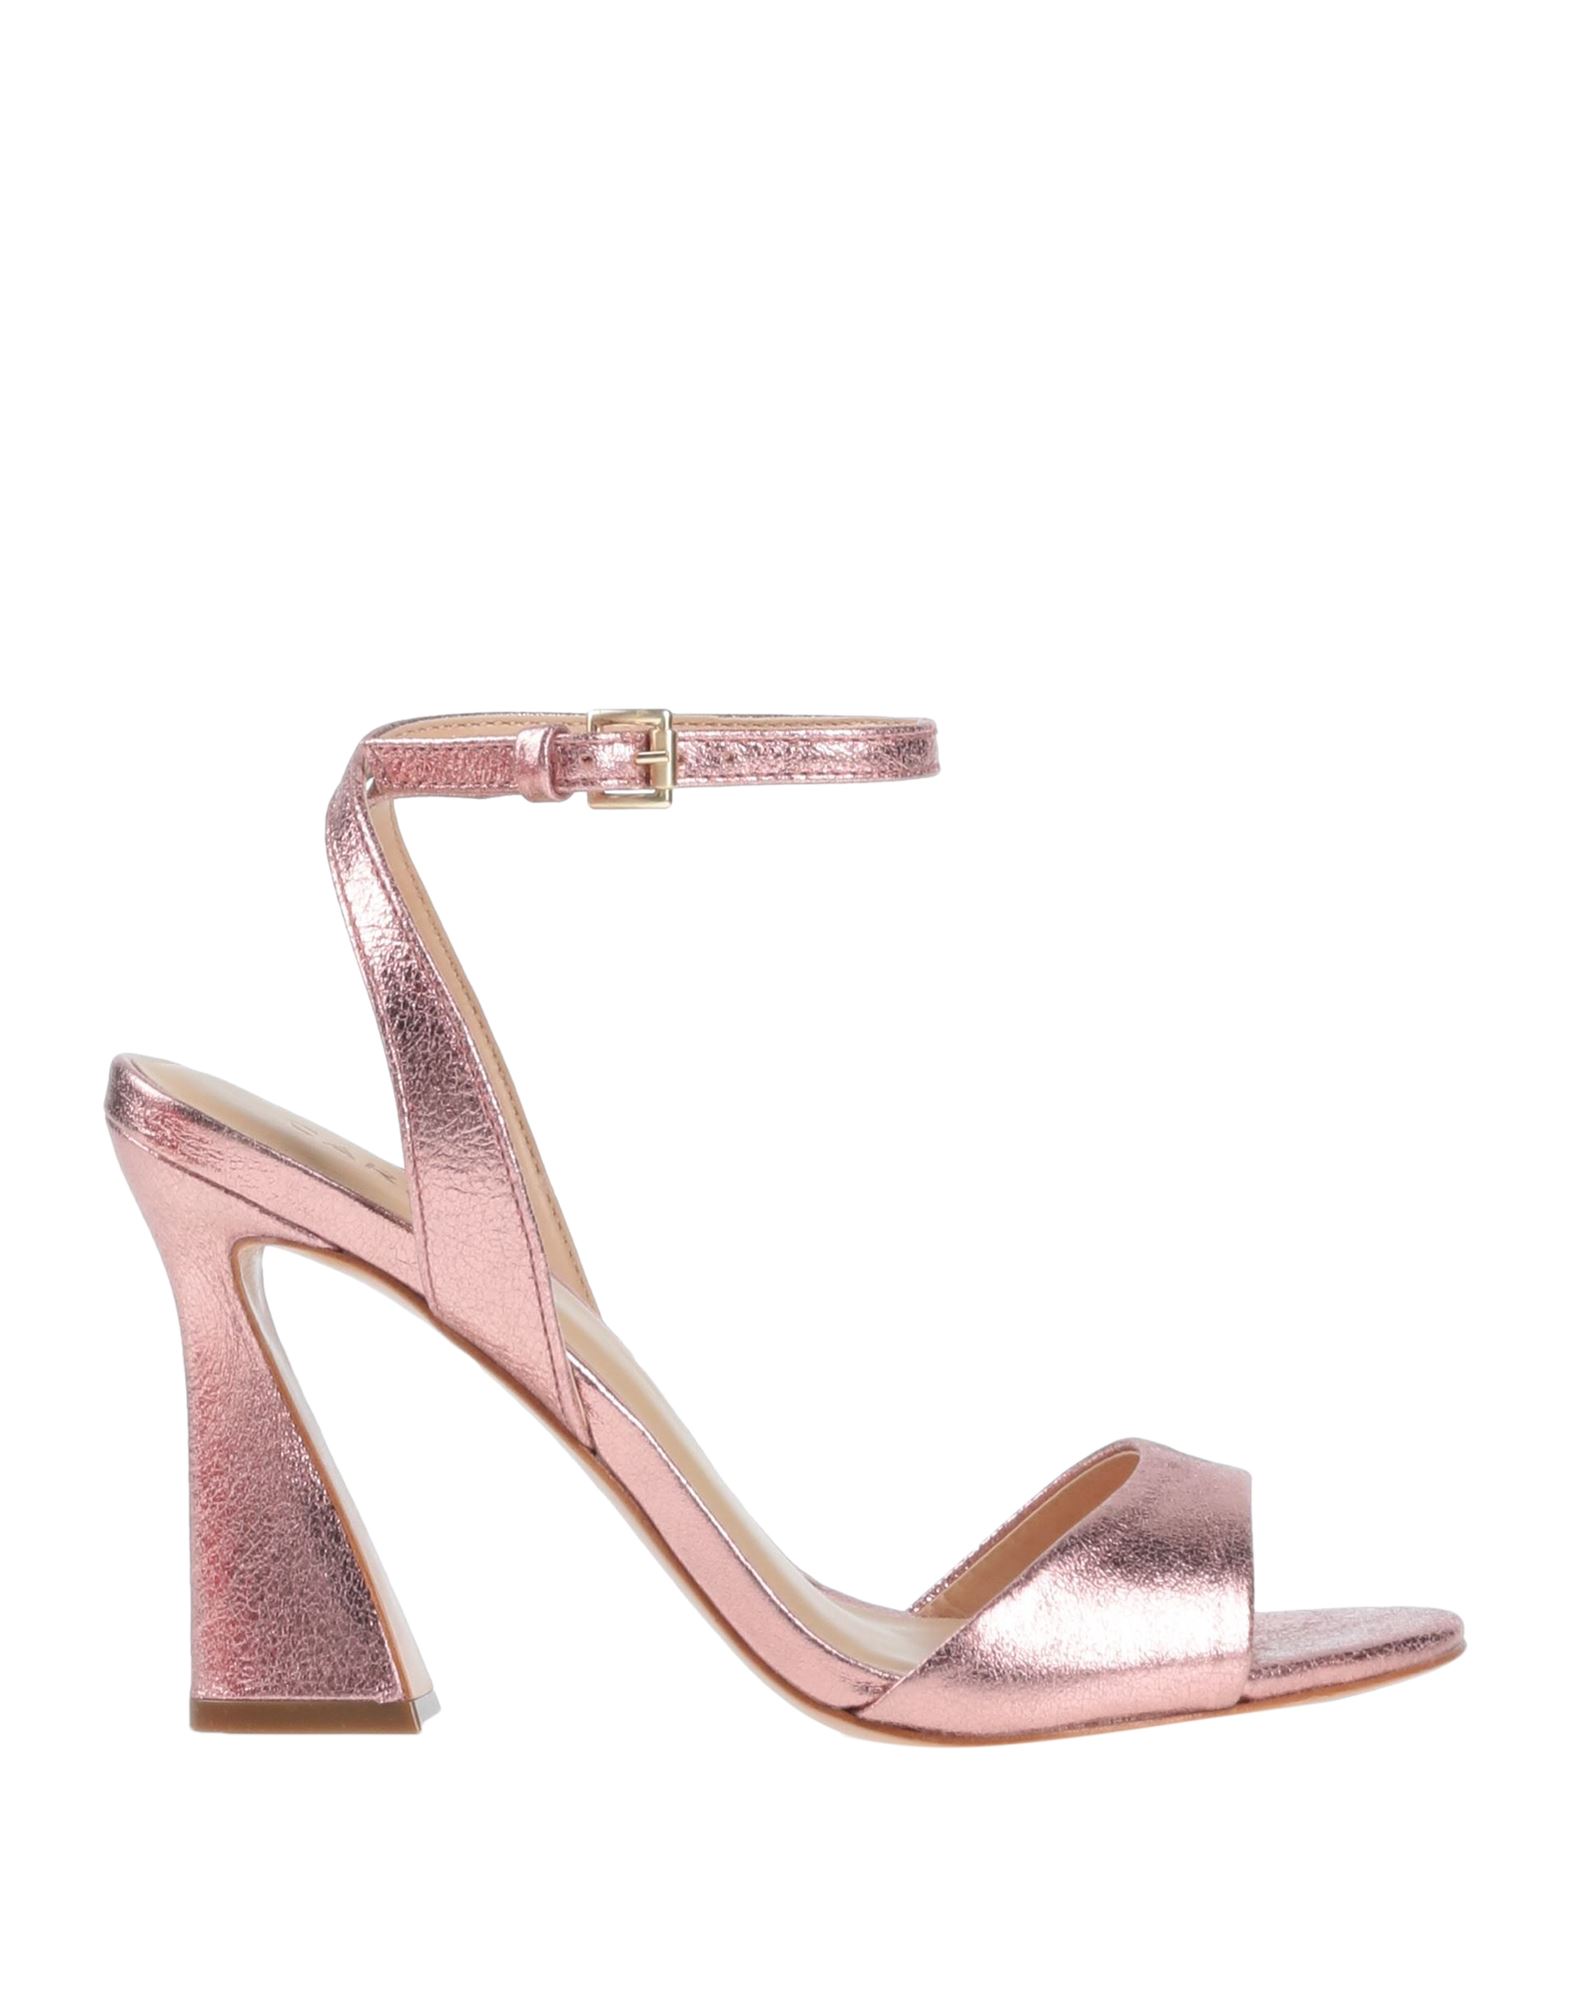 Carrano Sandals In Rose Gold